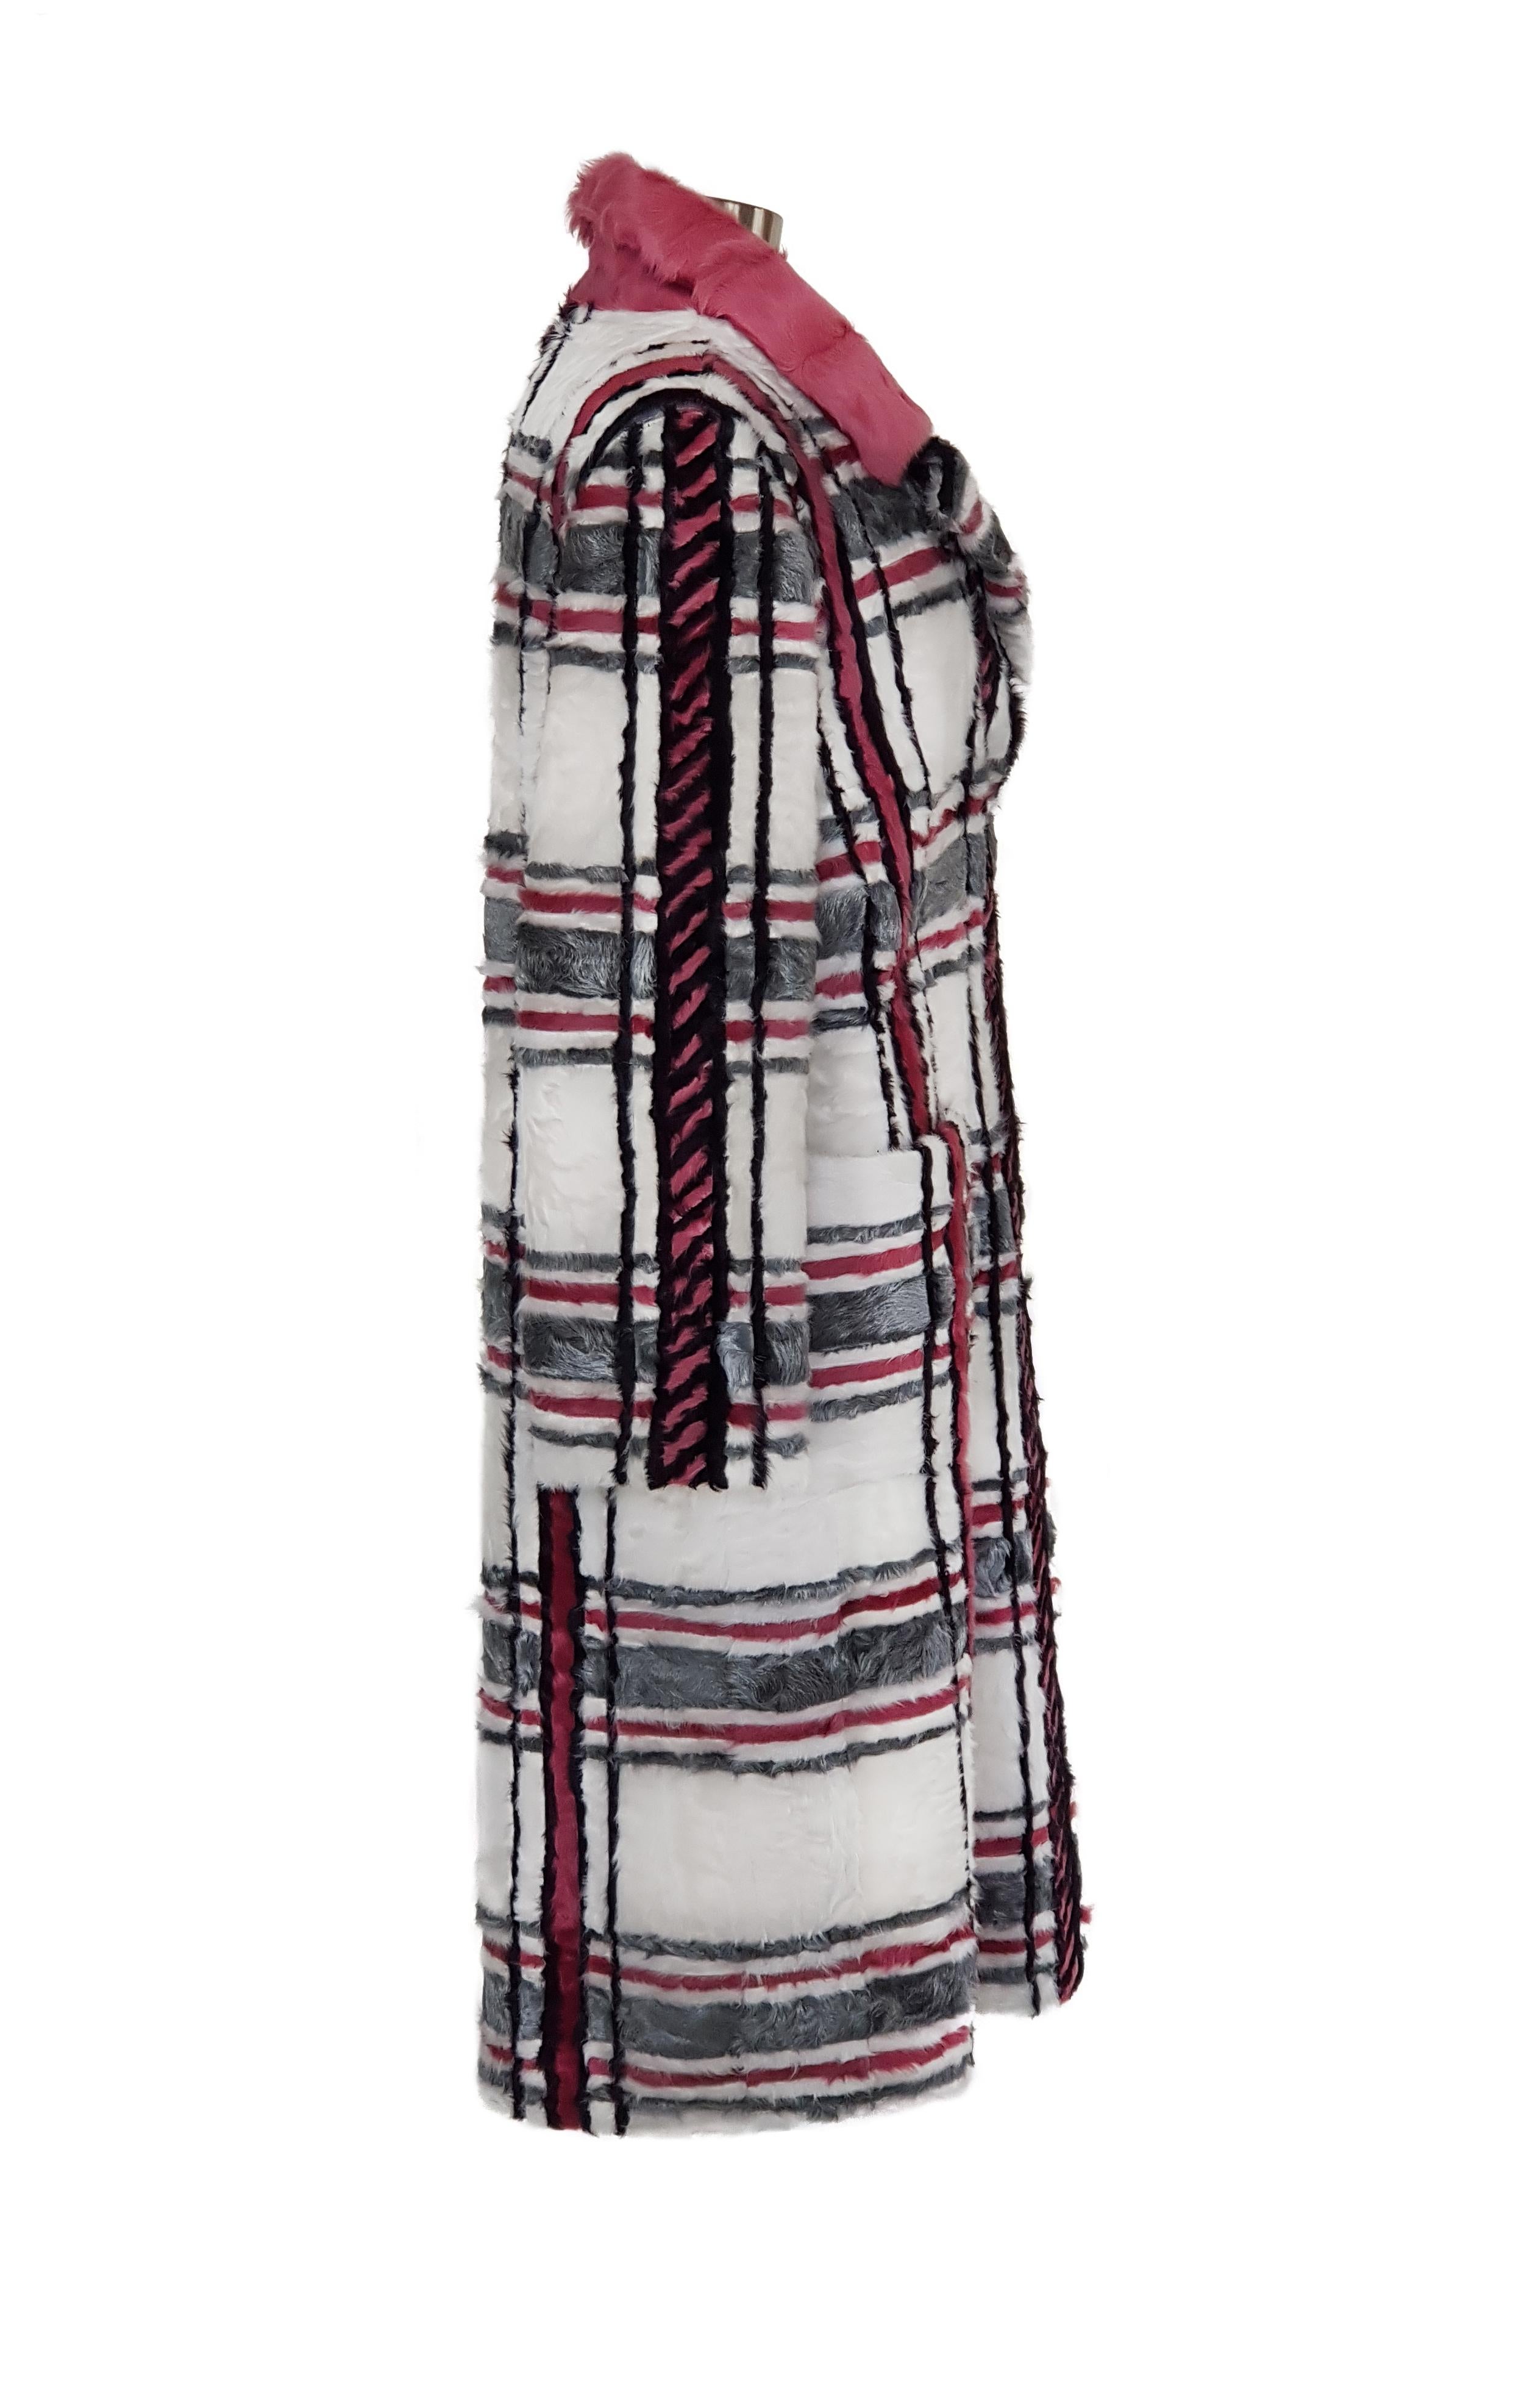 Lamb Coat with Notched Collar and madras pattern by Helen Yarmak. Snap closure. 